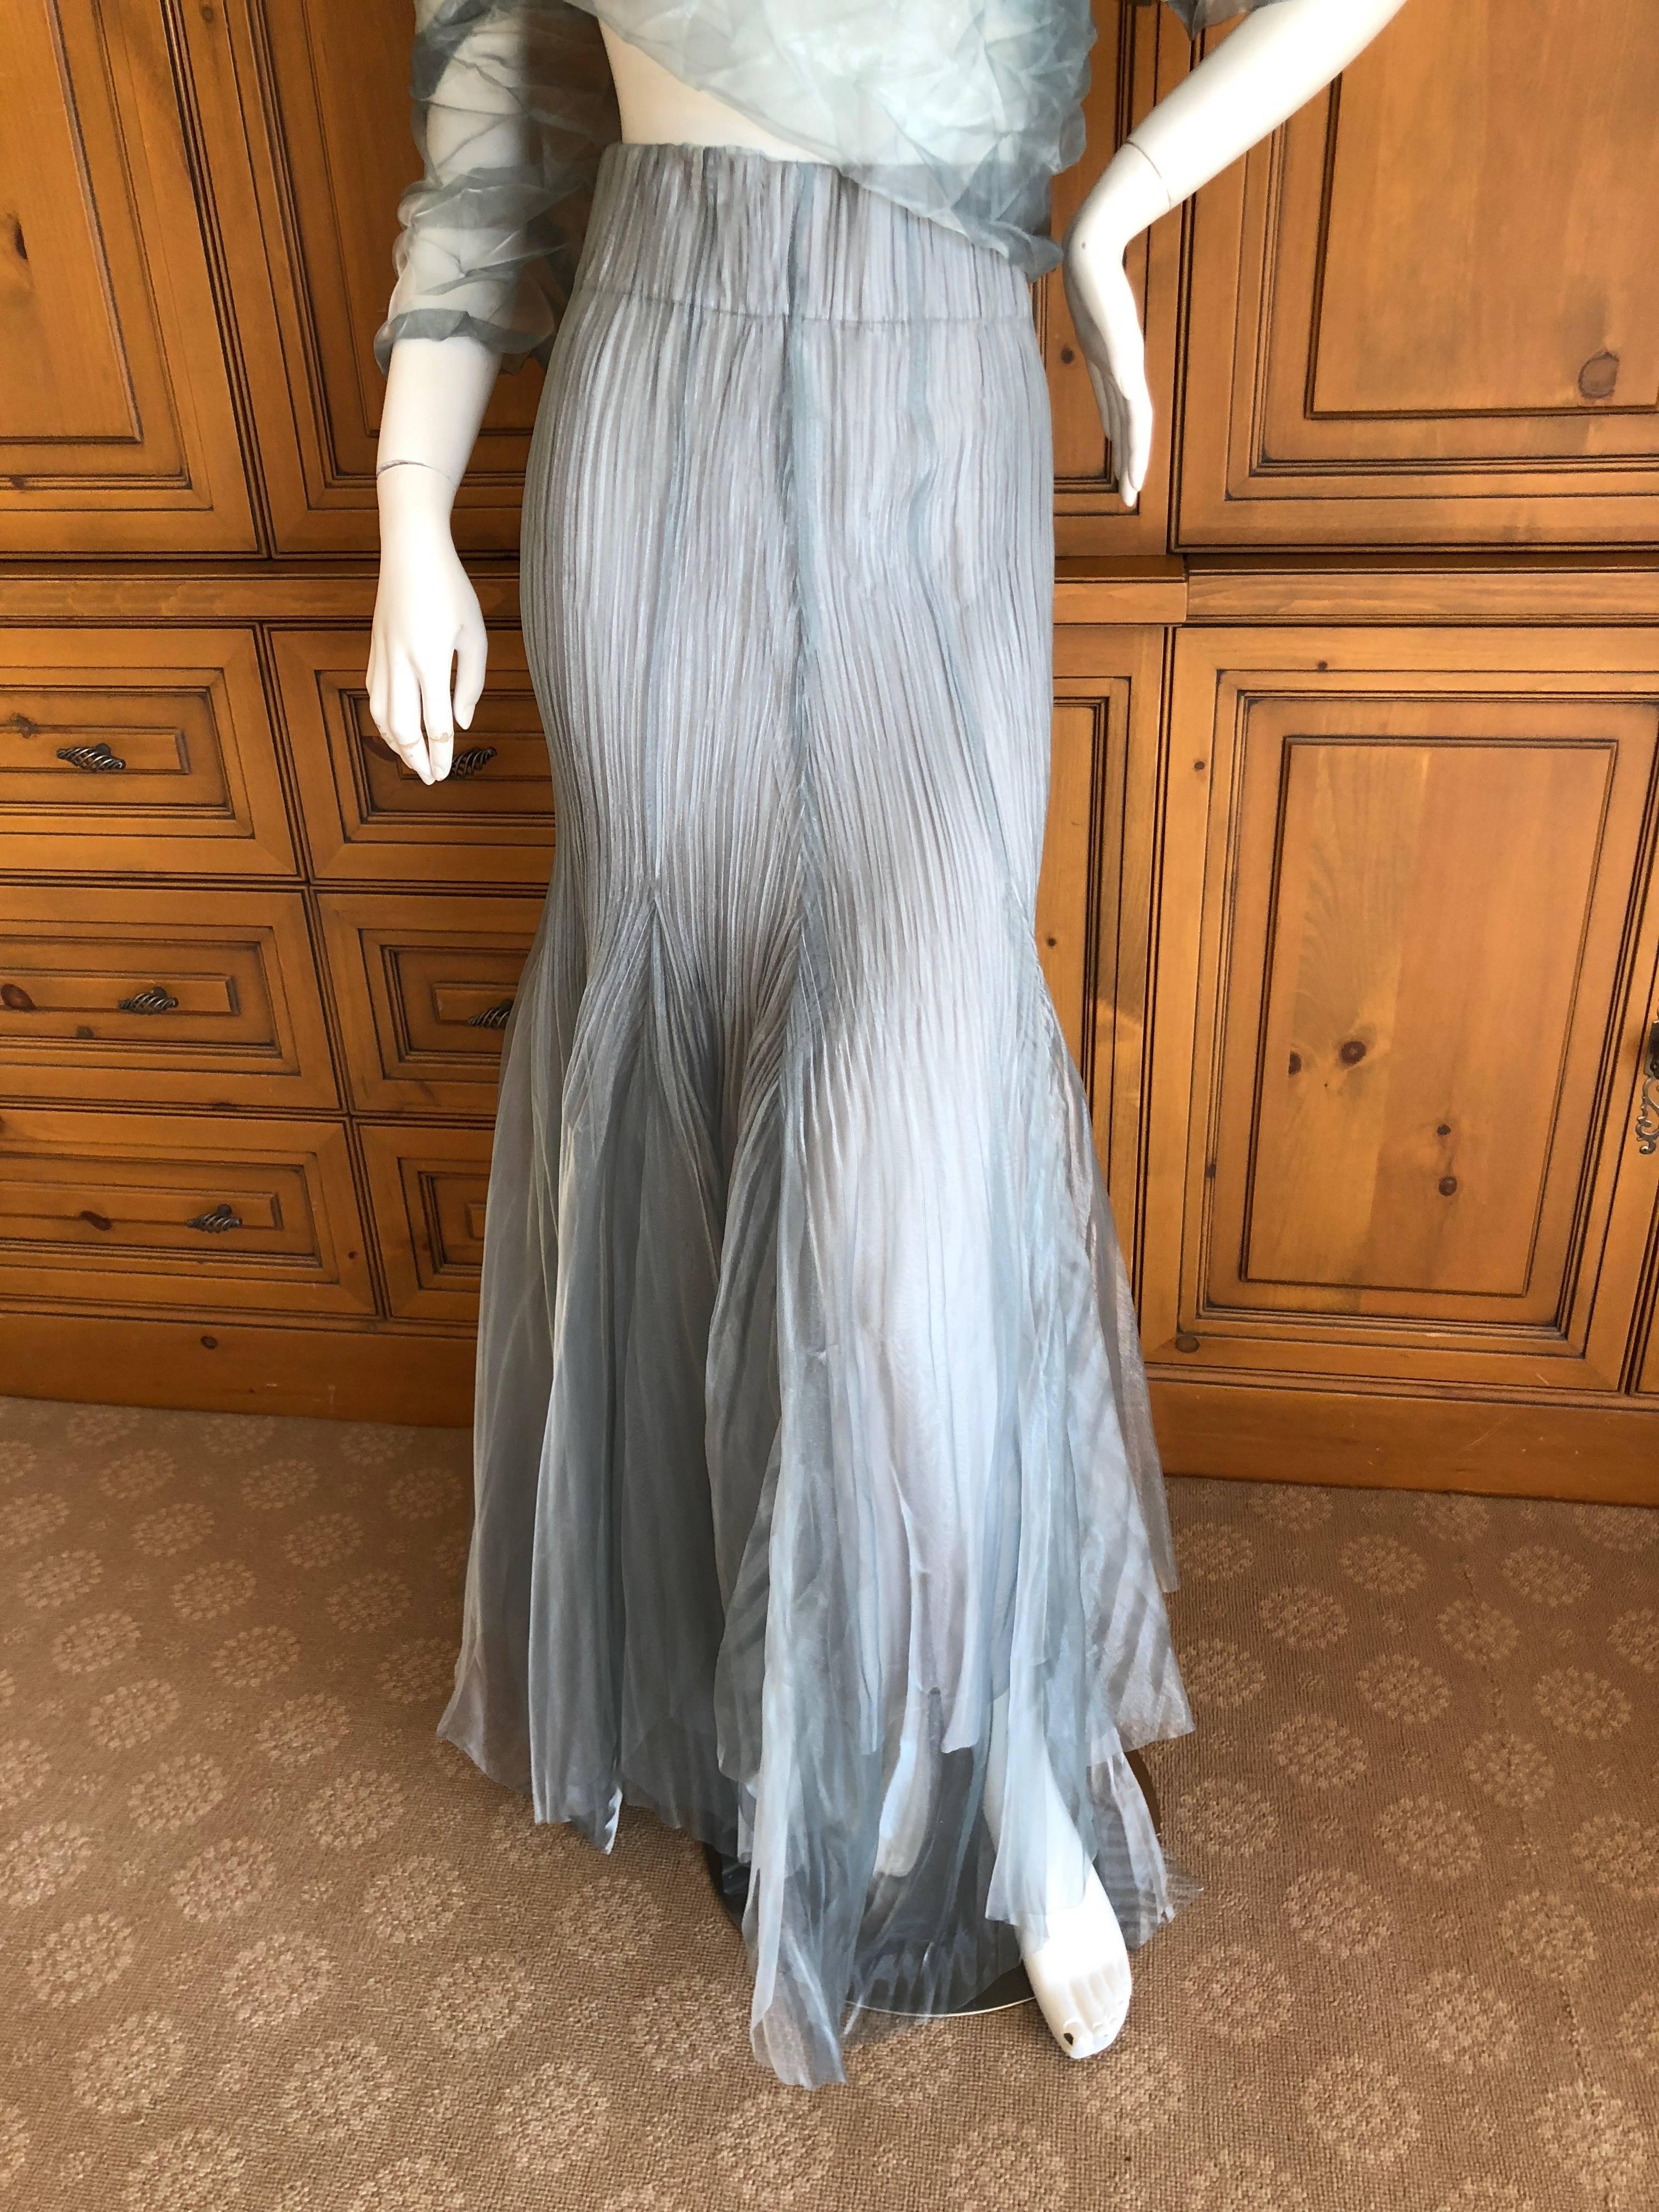 Issey Miyake Fete Vintage Silvery Evening Dress or Skirt w Matching Pyramid Wrap.
New with tags
I am not certain if it is a skirt or strapless dress, can be worn either way.
The shrug is very long and can be styled many ways.
Lots of stretch.
As a